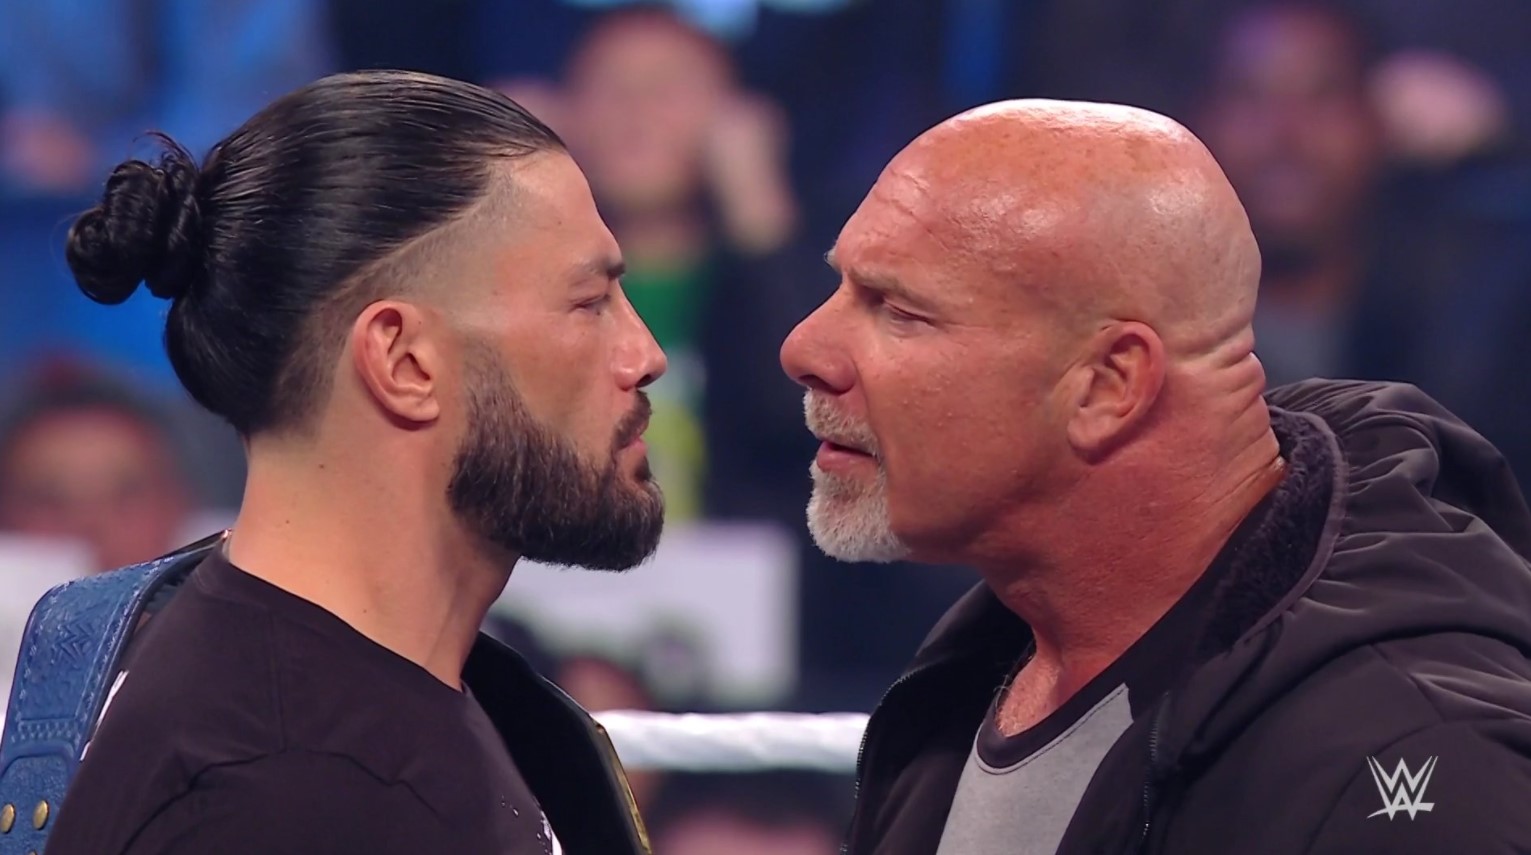 WWE Elimination Chamber: Will Goldberg ever return to WWE after his dream bout against Roman Reigns? Check details here